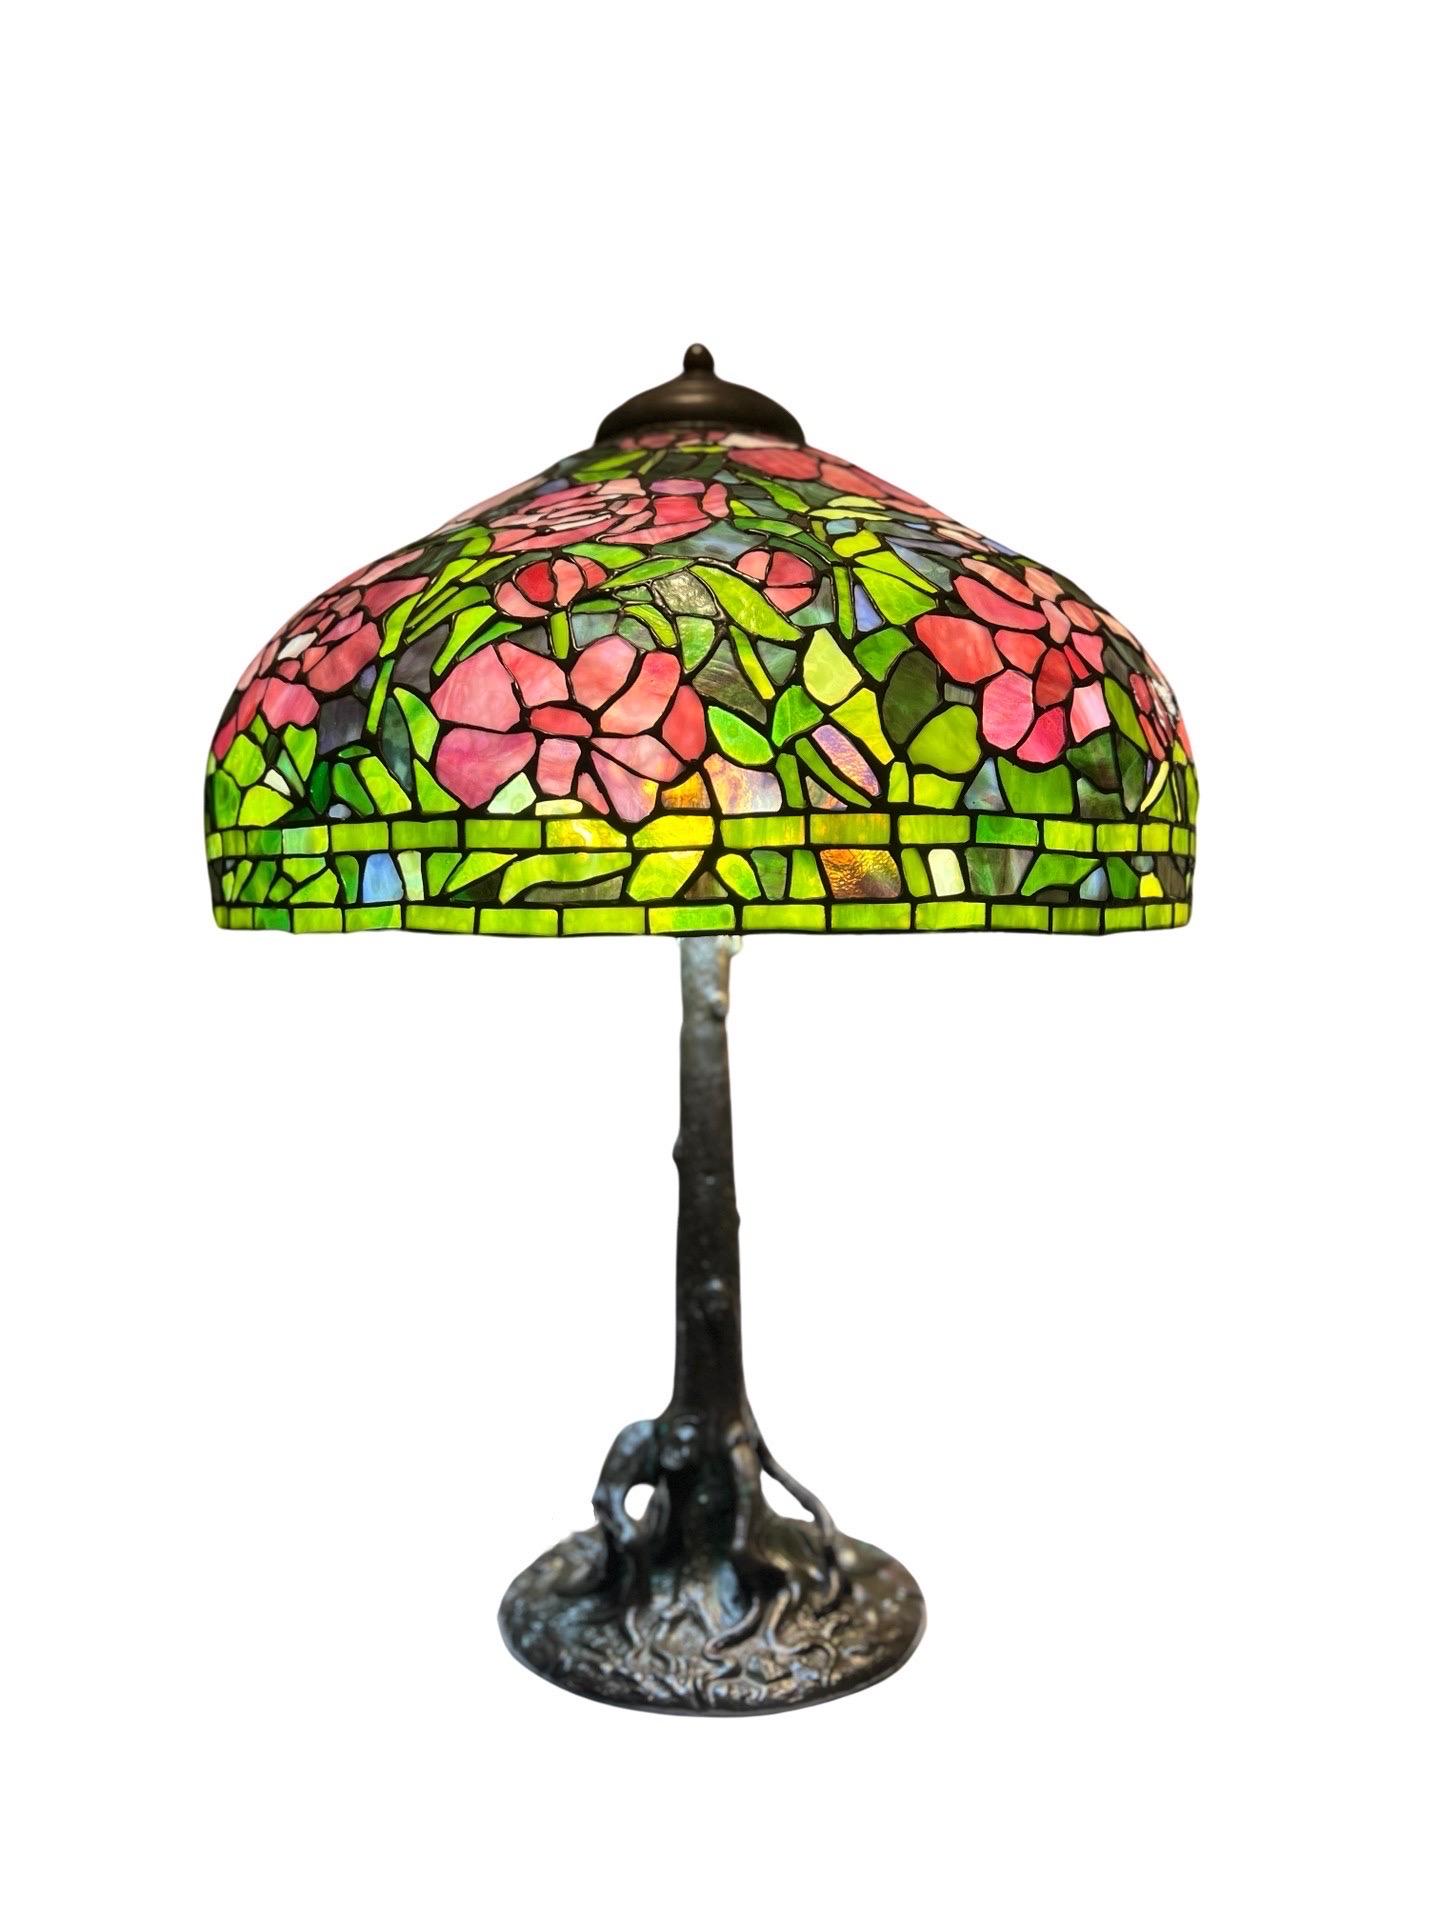 Unique Art Glass & Metal Company (New York, active 1889-1917), circa 1915. 
This truly magnificent leaded glass table lamp which was produced during the time period after Louis Comfort Tiffany's patent on the famous copper foil & leaded glass